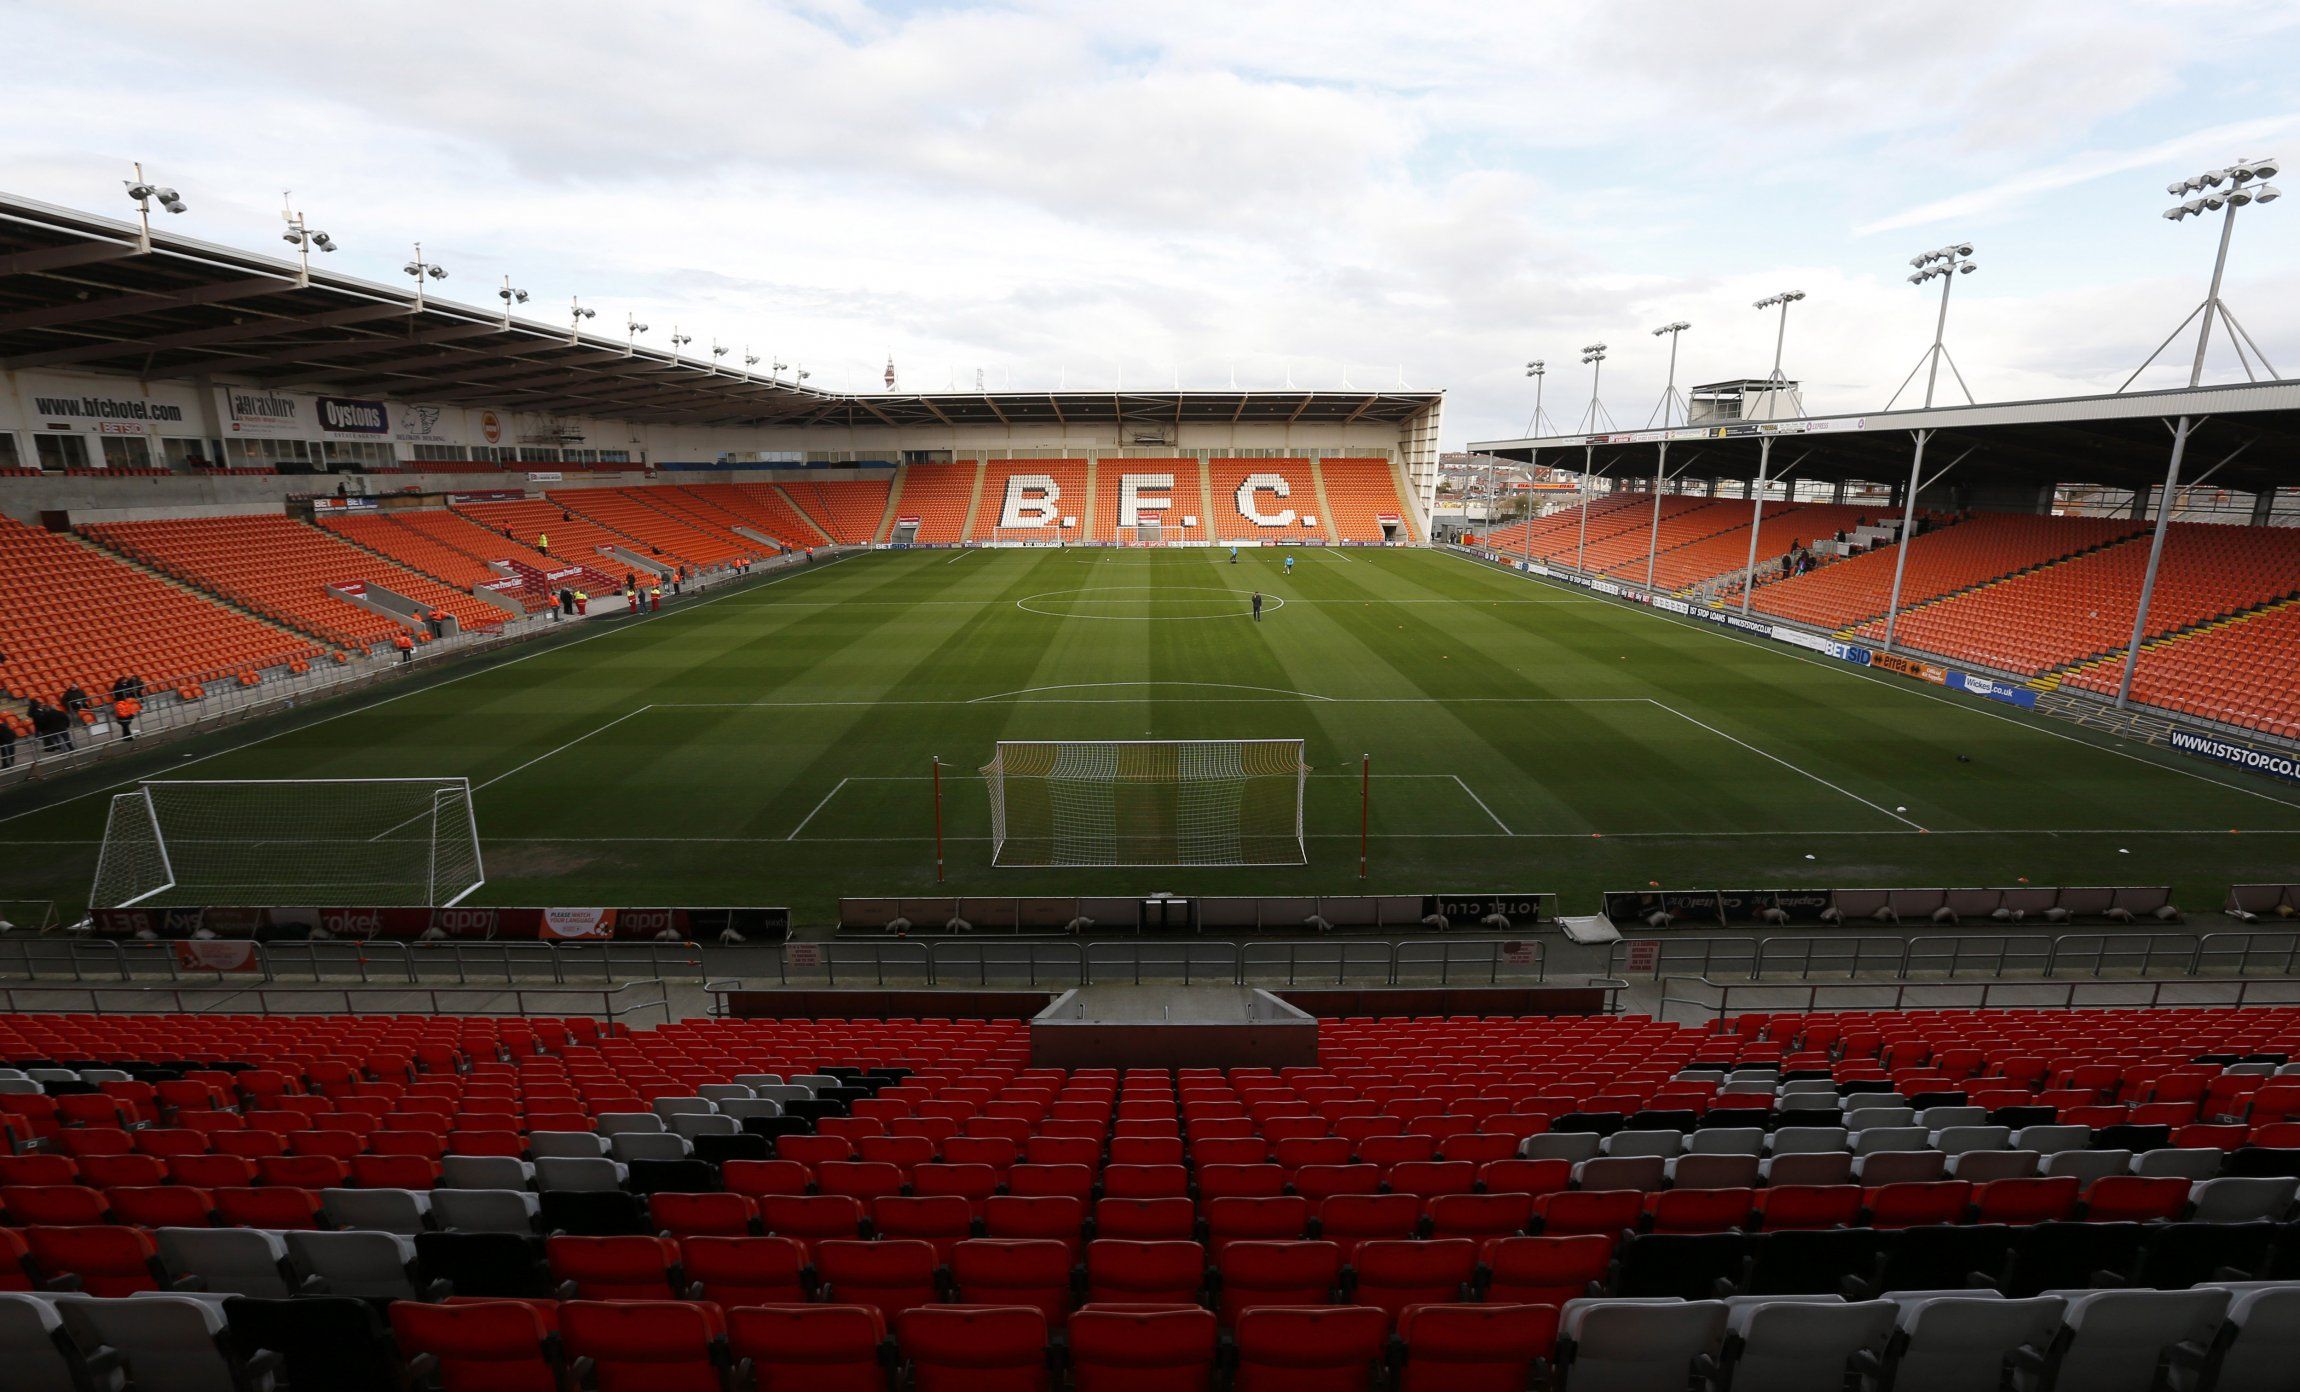 General view of Bloomfield Road